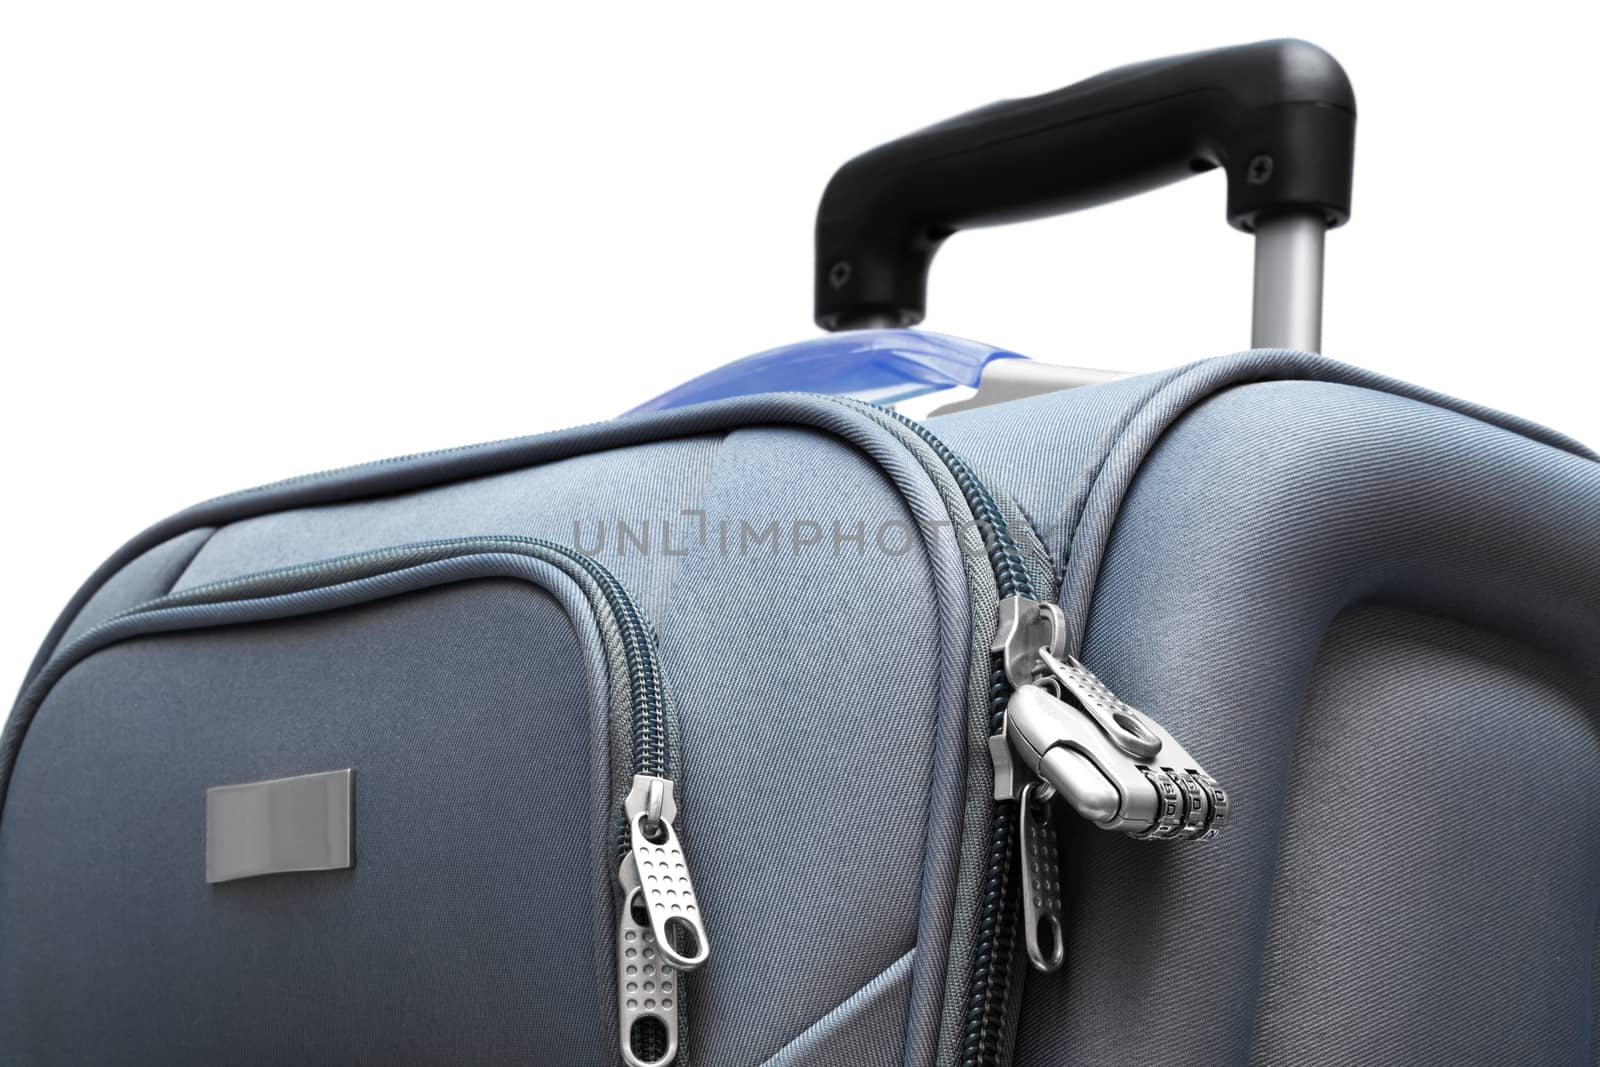 modern large suitcase on a white background